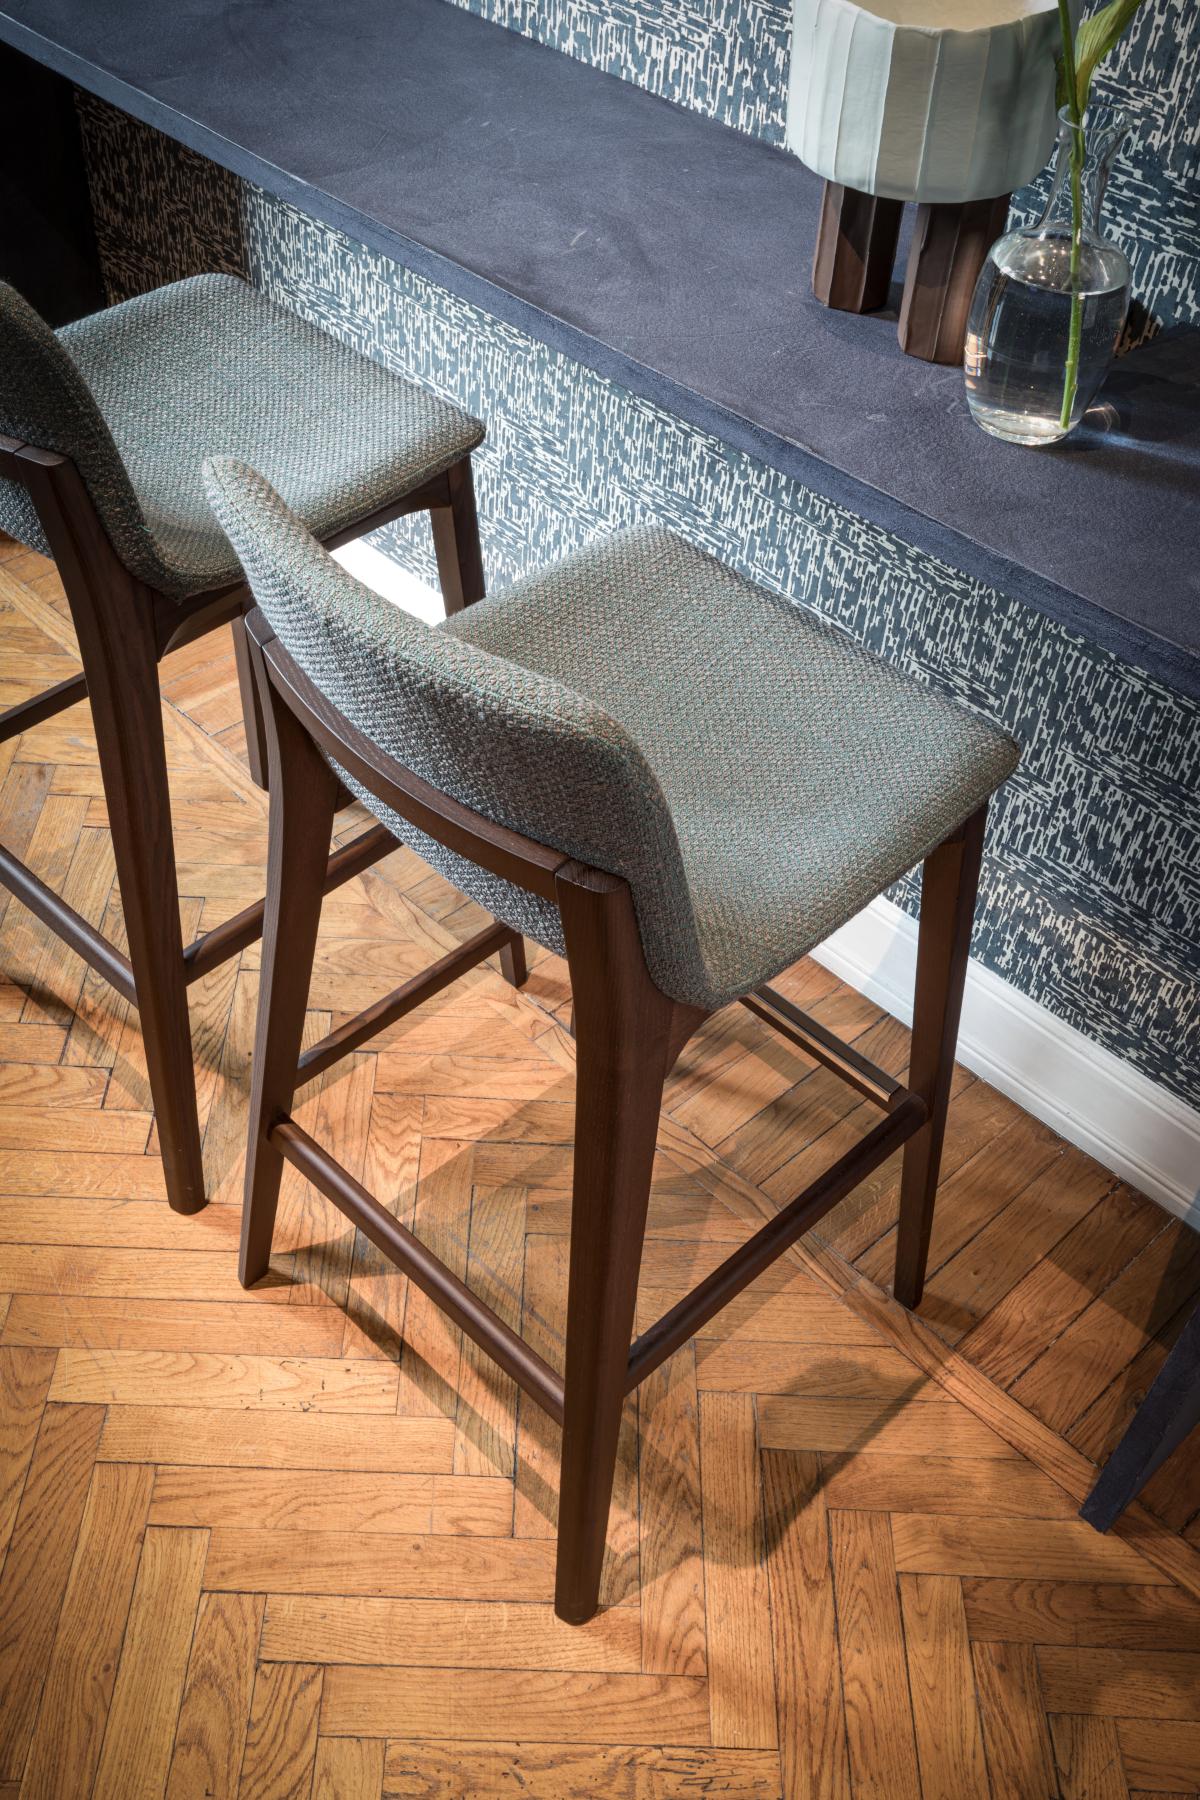 Contemporary set of 2 stools by Studio Tecnico Interna8, Wood Fabric In New Condition For Sale In Pordenone, IT